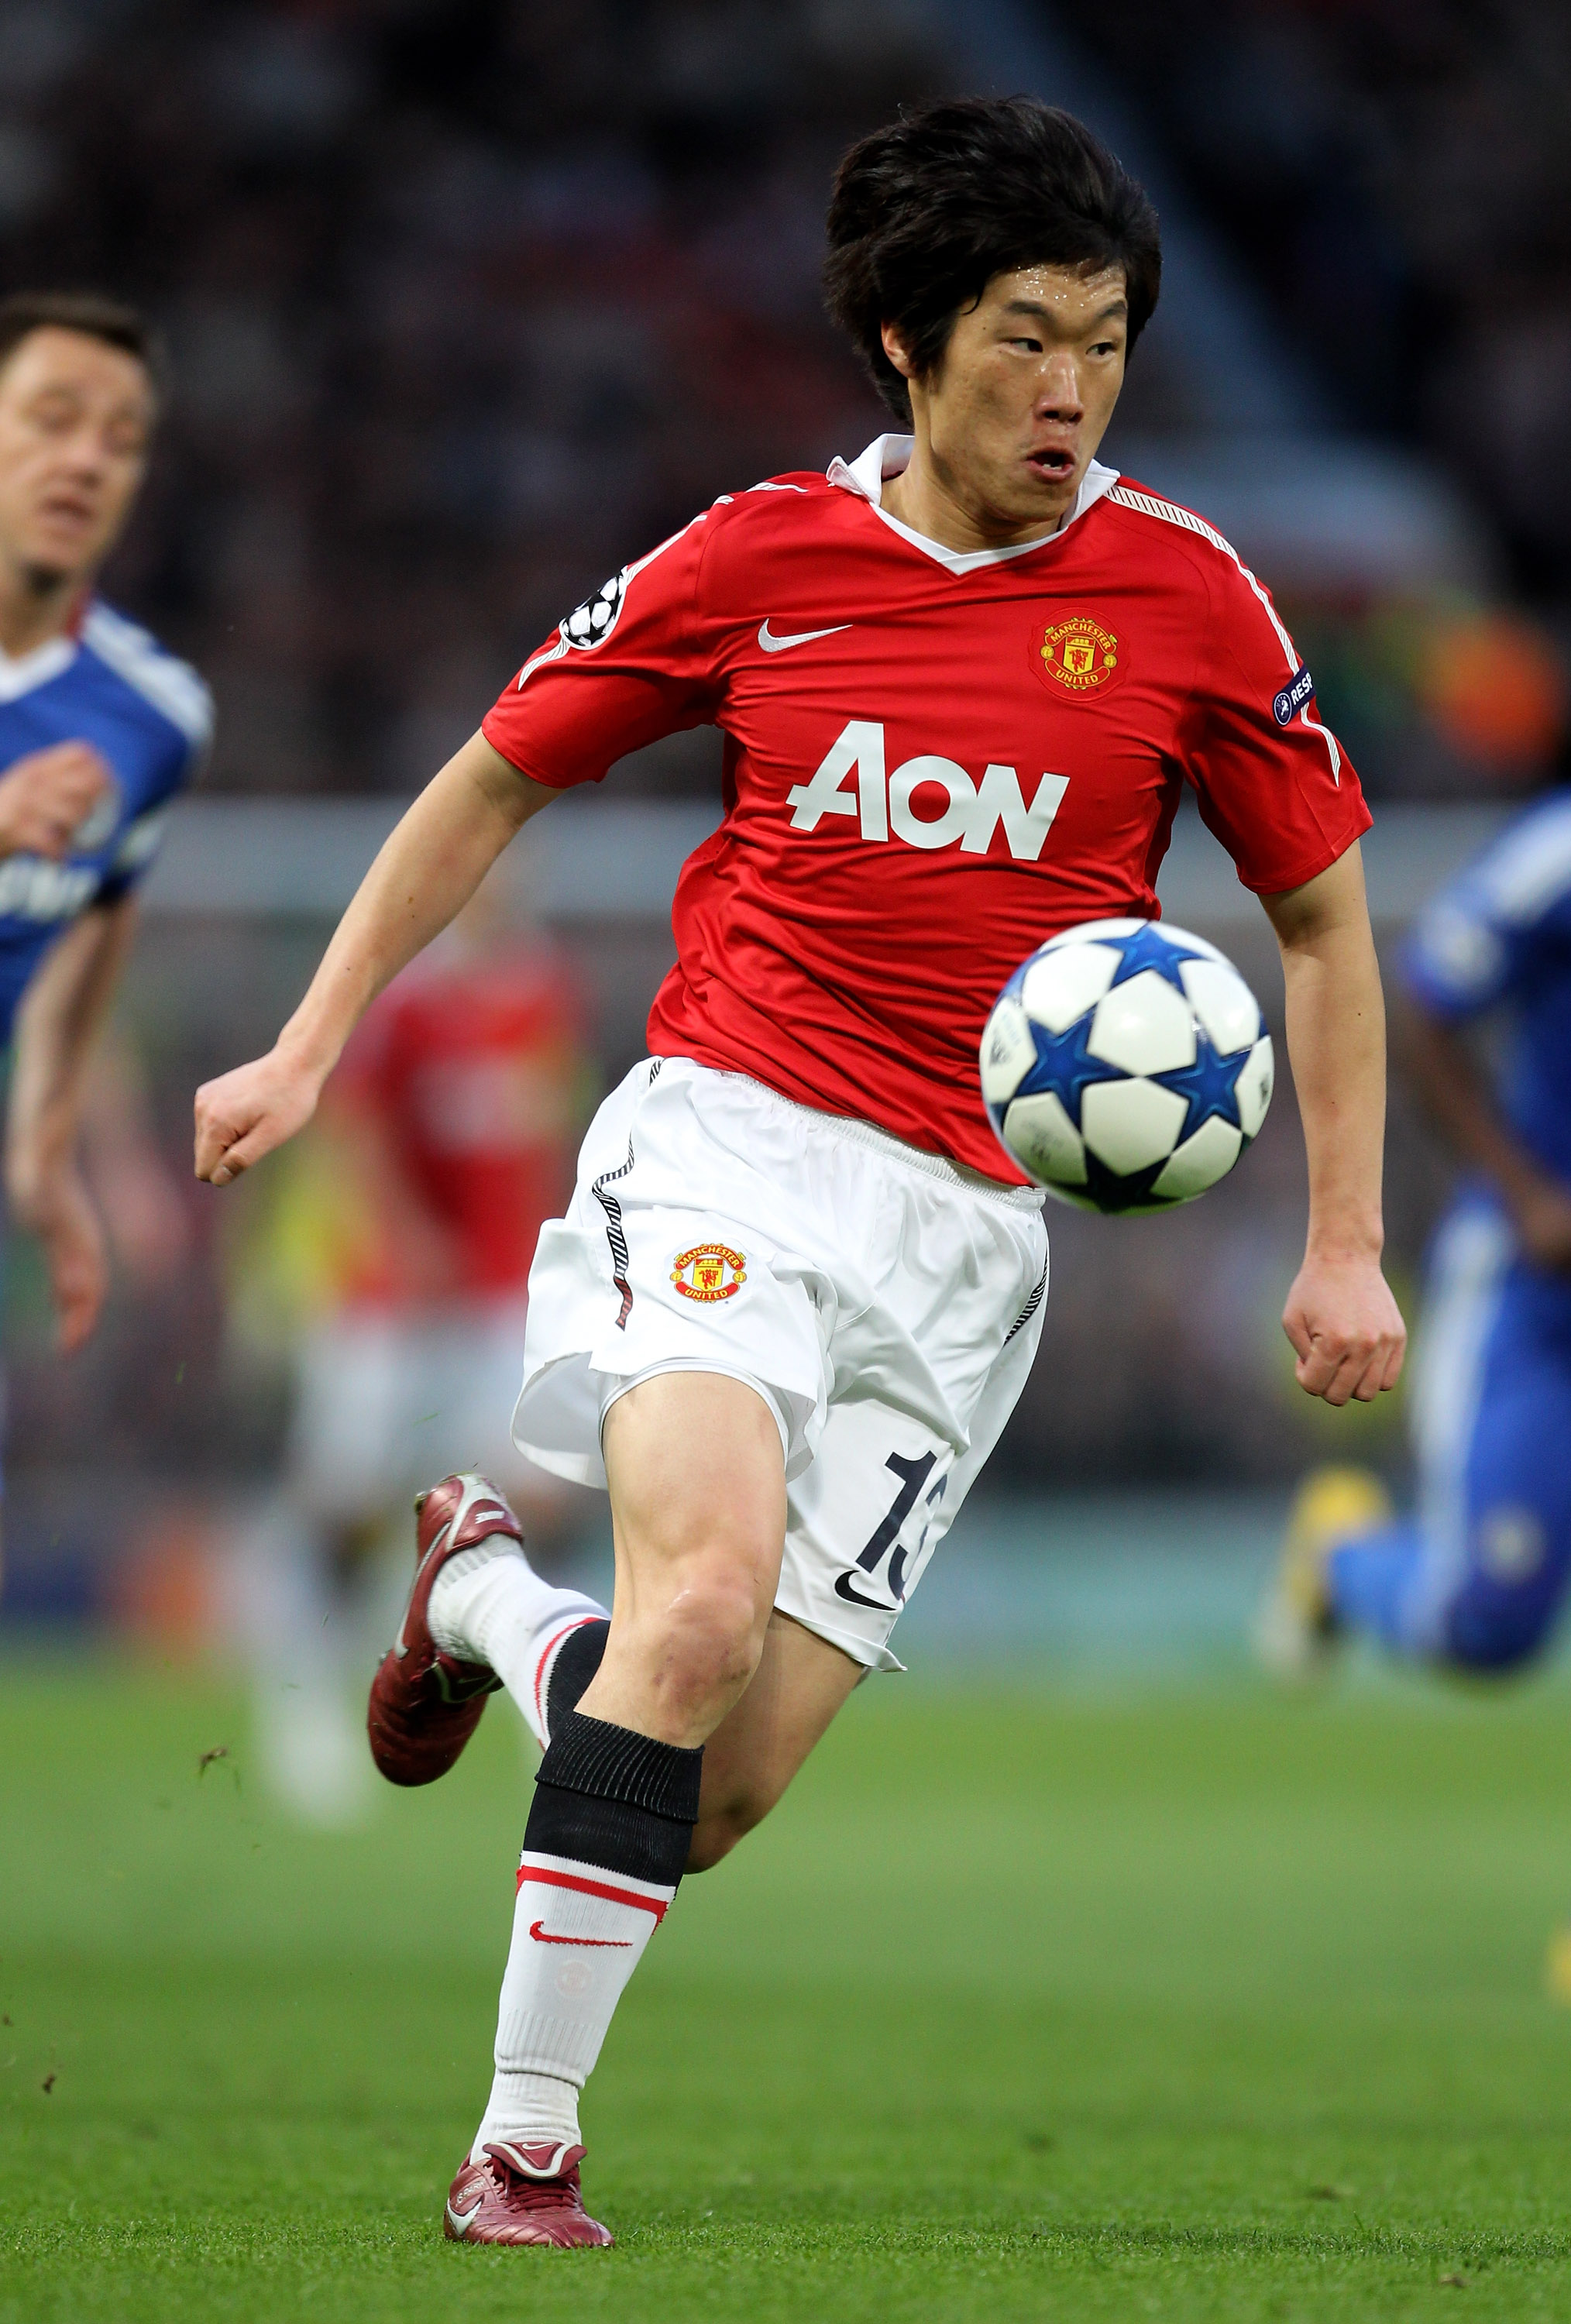 MANCHESTER, ENGLAND - APRIL 12:  Ji-Sung Park of Manchester United in action during the UEFA Champions League Quarter Final second leg match between Manchester United and Chelsea at Old Trafford on April 12, 2011 in Manchester, England.  (Photo by Alex Li